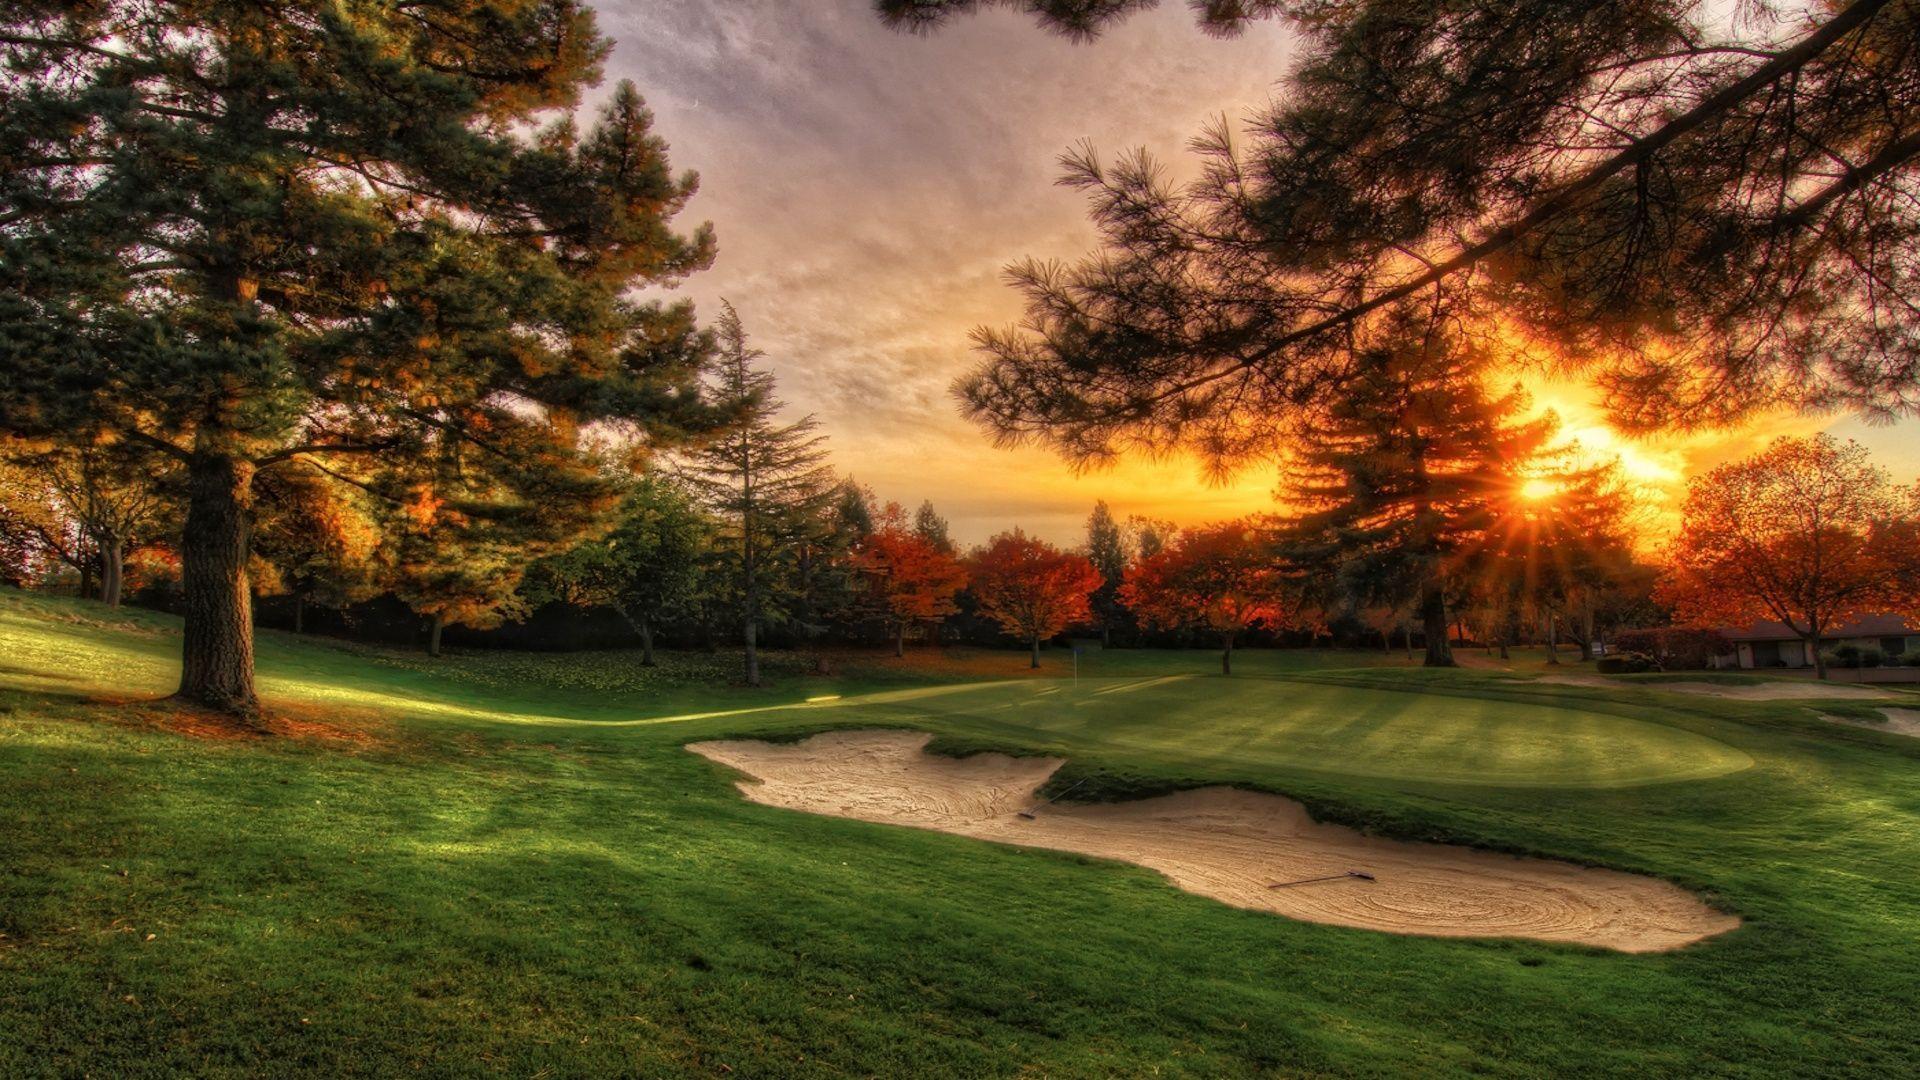 Golf Course HD Wallpaper. Golf Course Picture